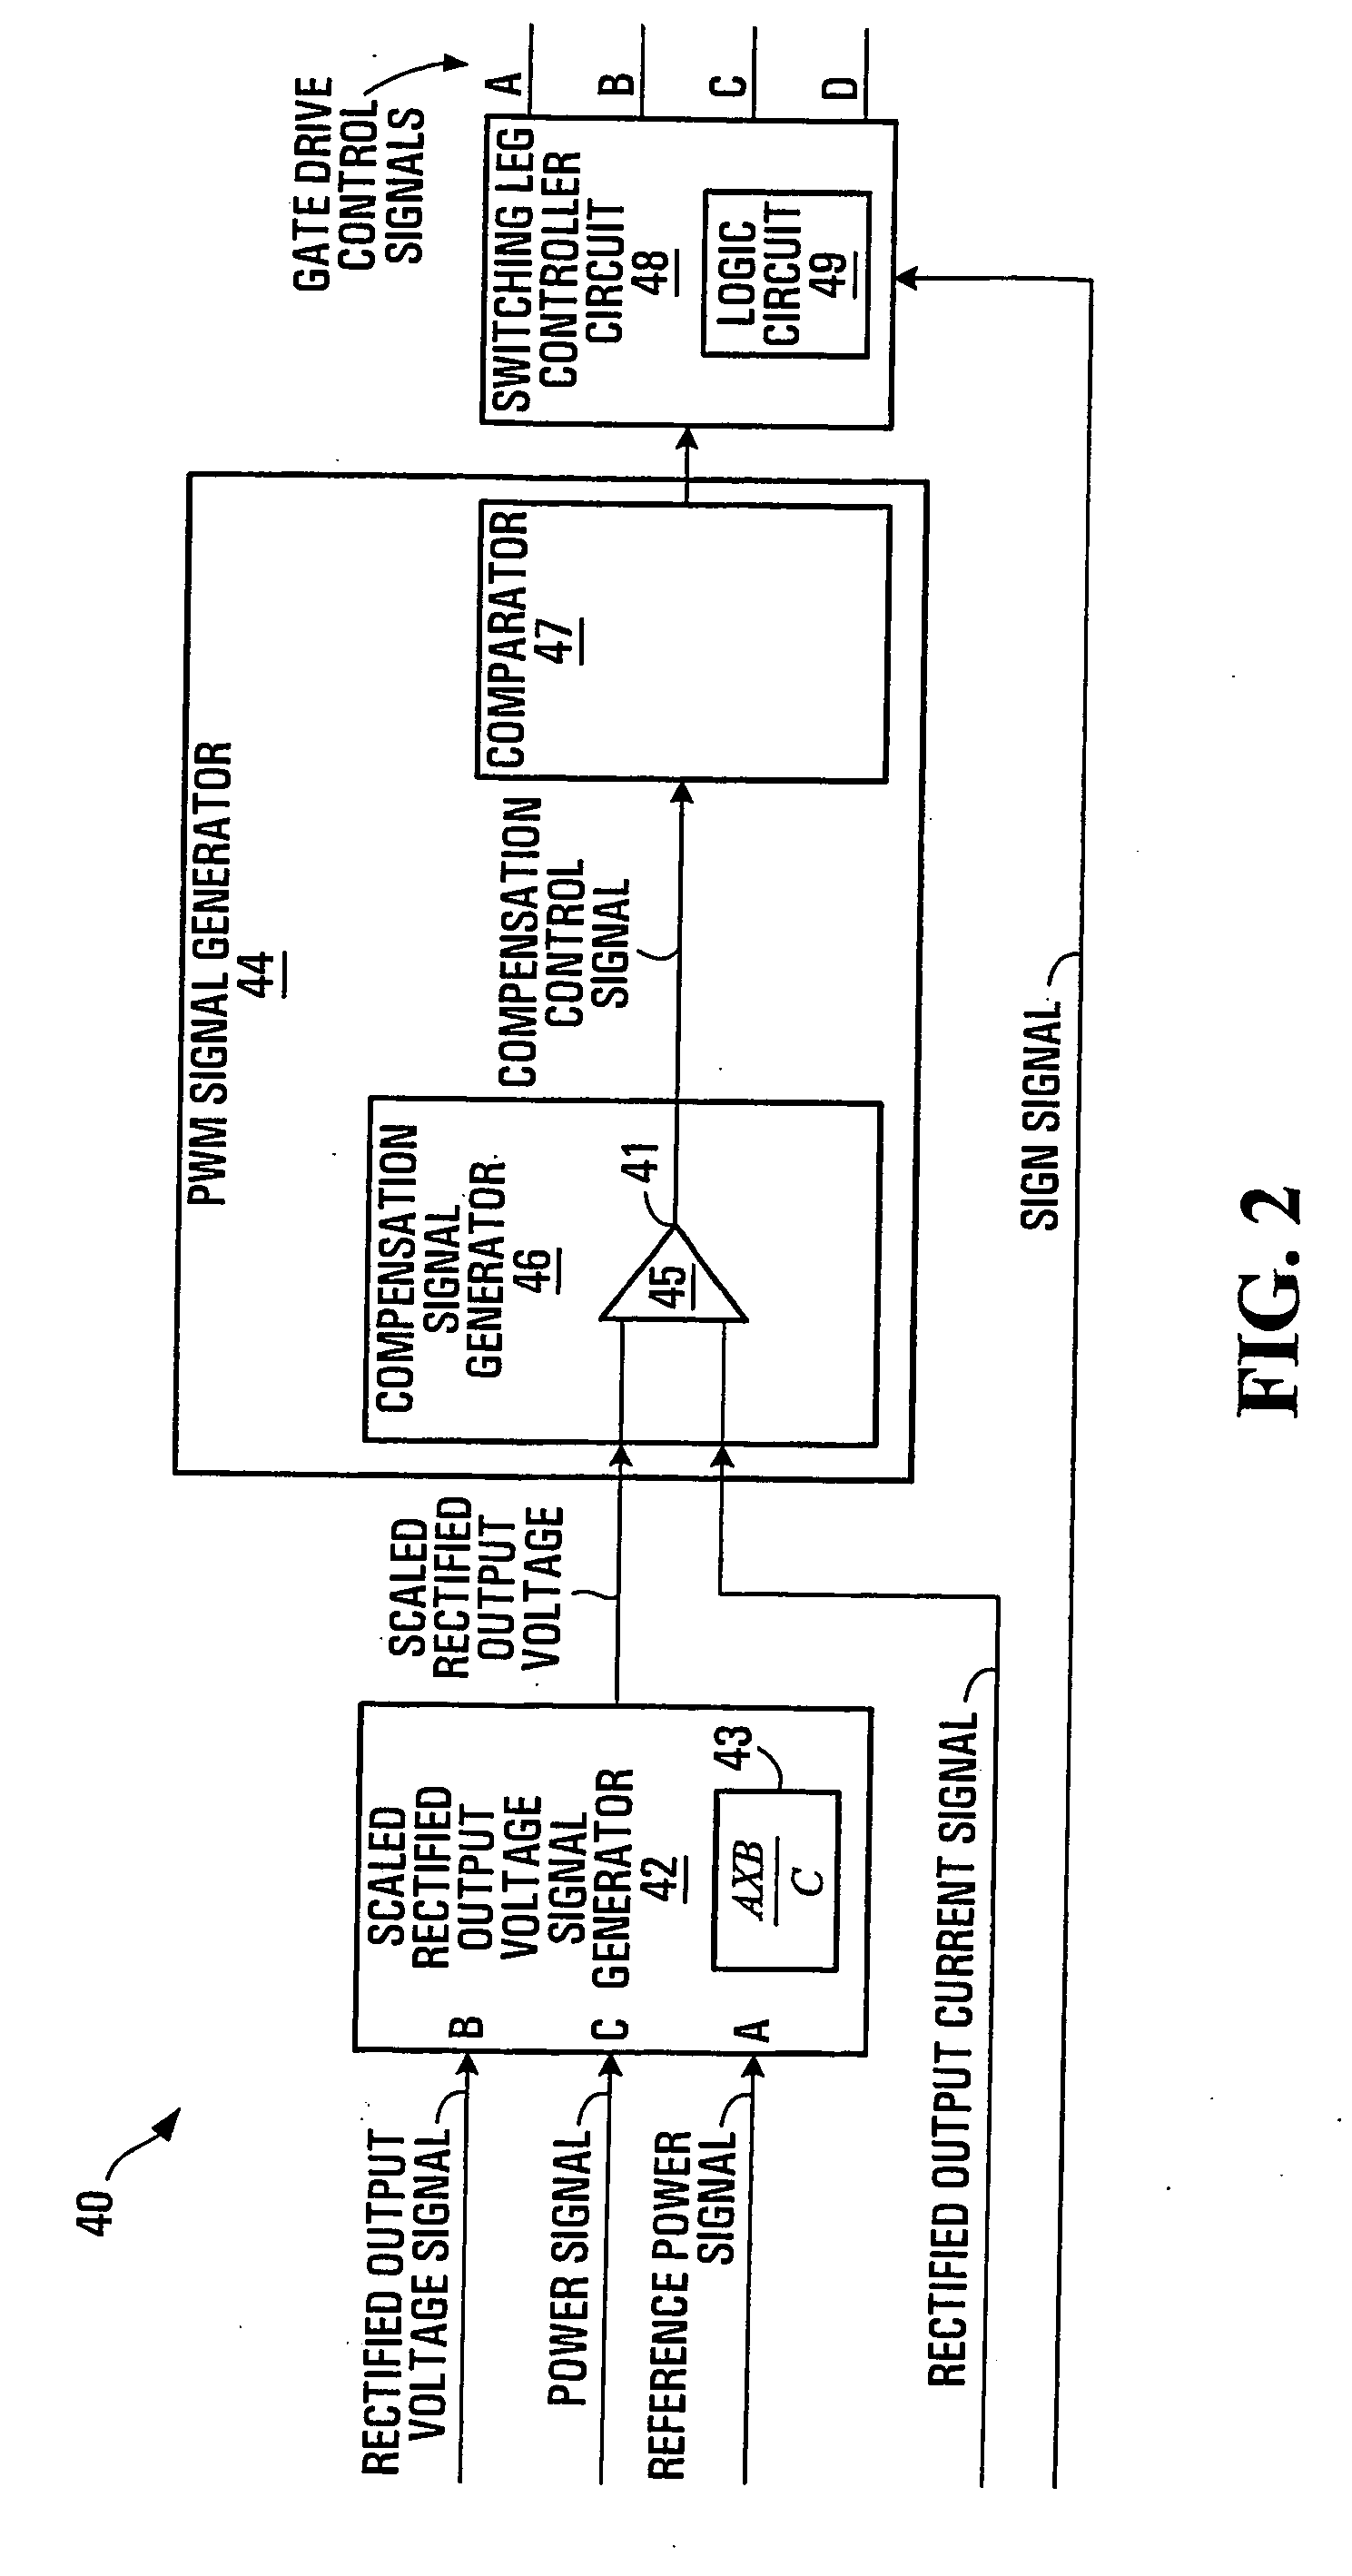 Output Power Factor Control of Pulse-Width Modulated Inverter